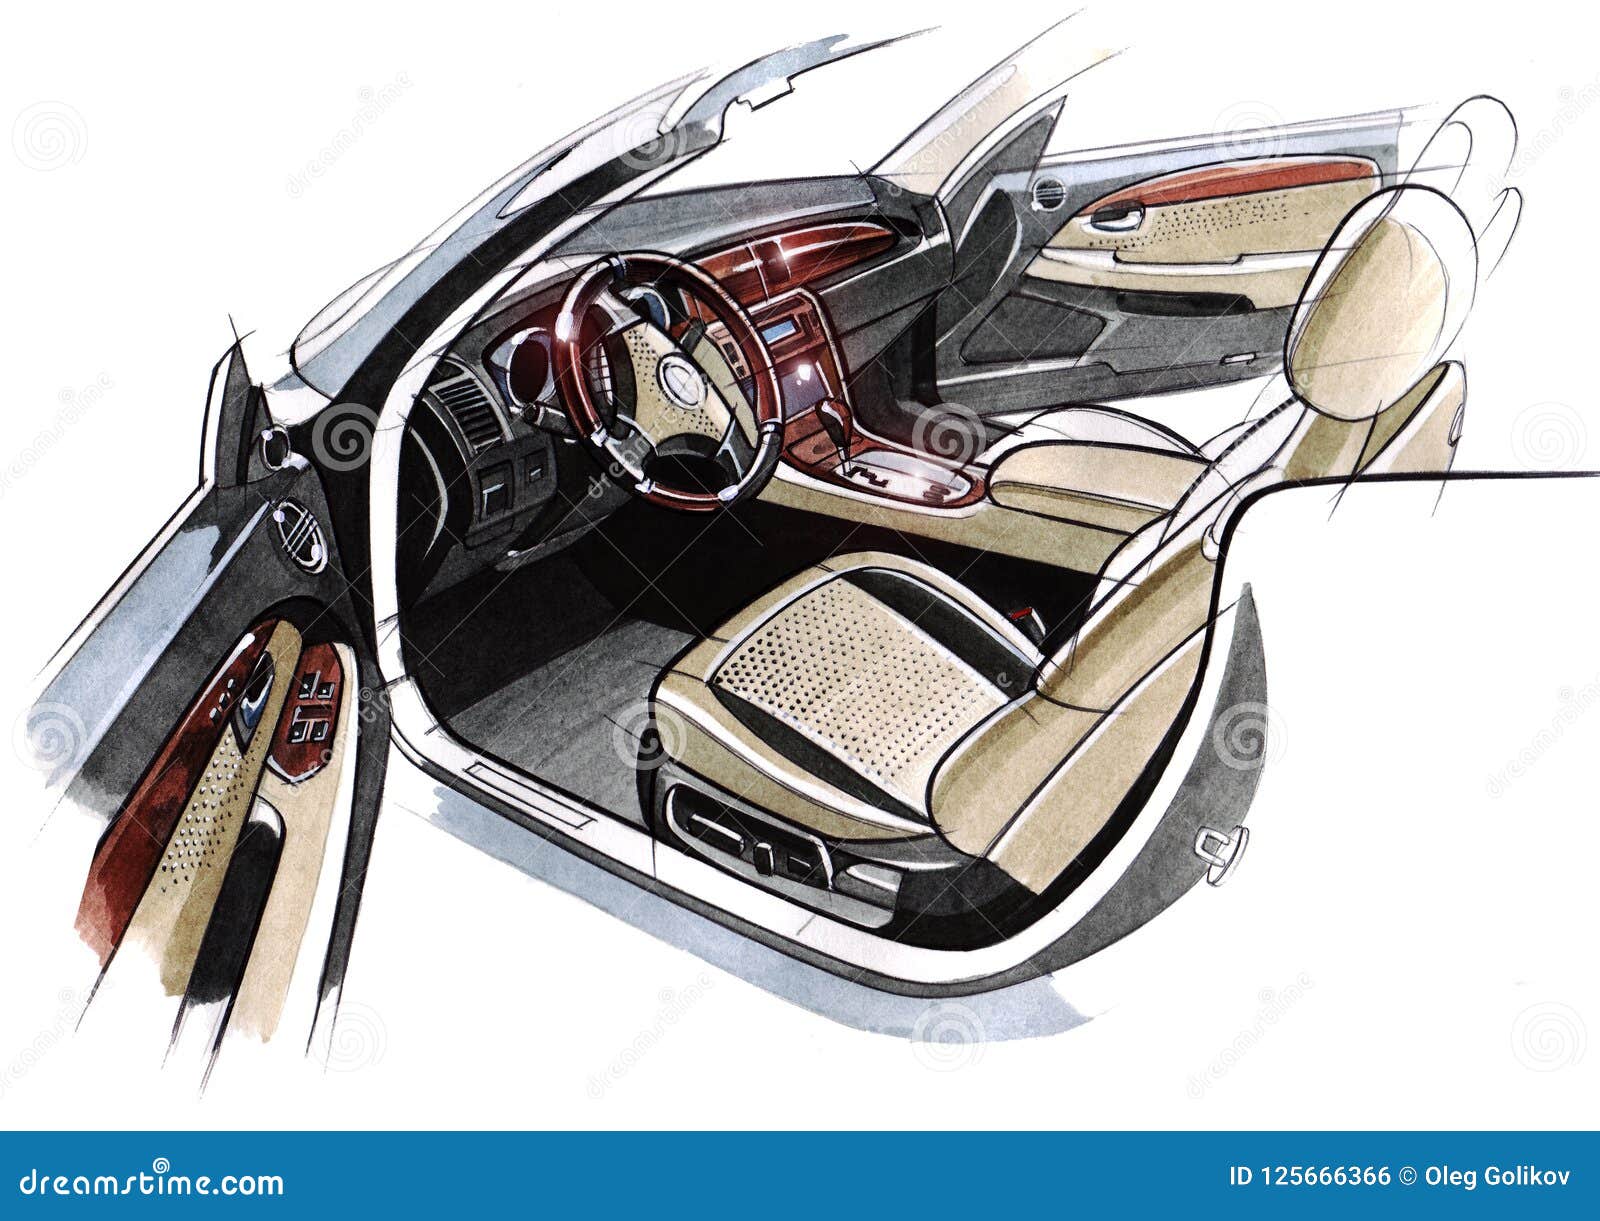 Patent Design Drawings for Car Interior  Invention patent Drawings   illutrations